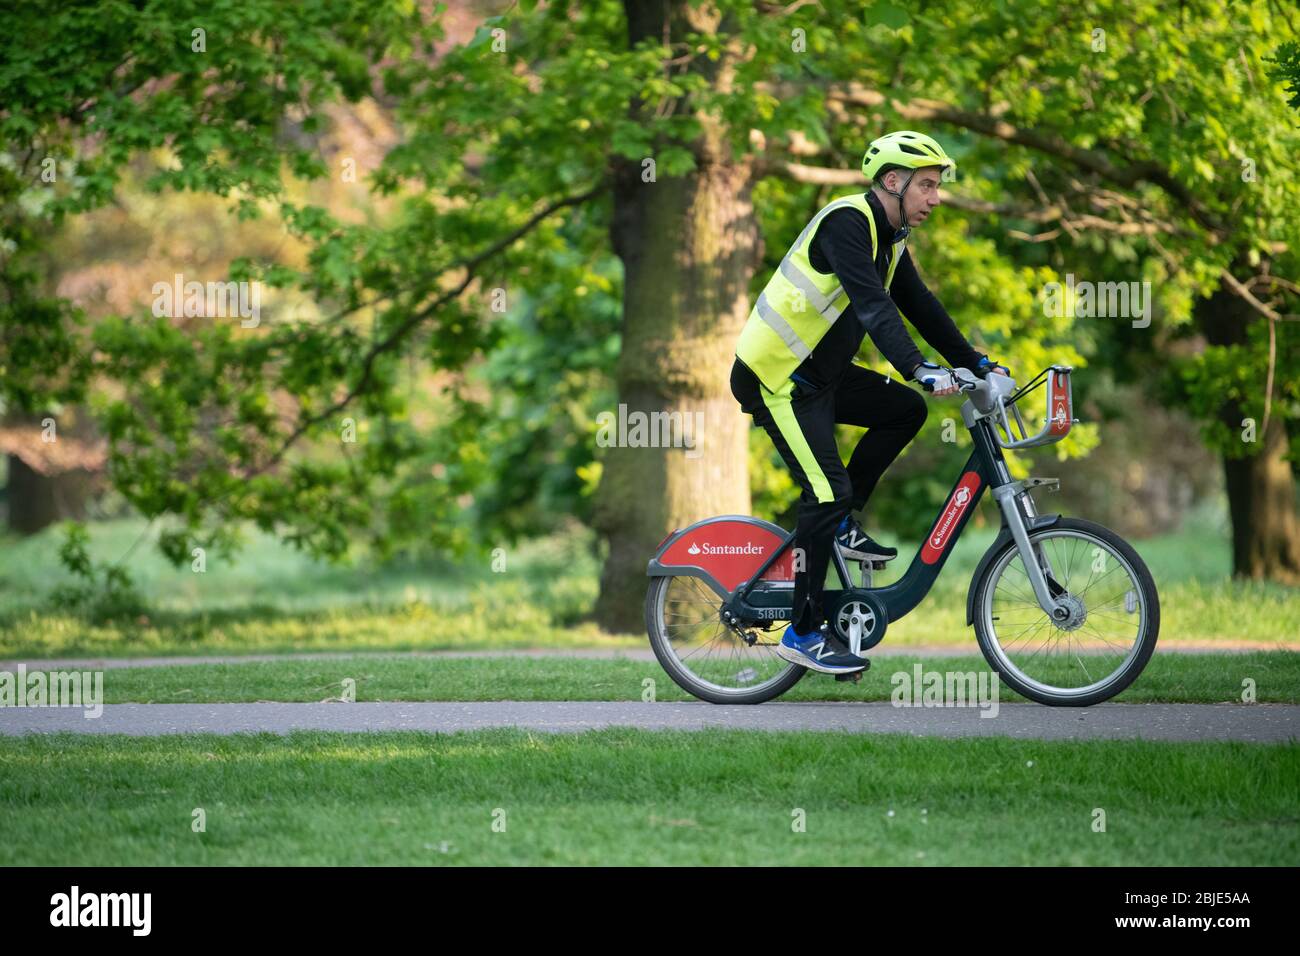 Cyclist on rented Santander bike wearing protective gloves and in London Lockdown. Stock Photo